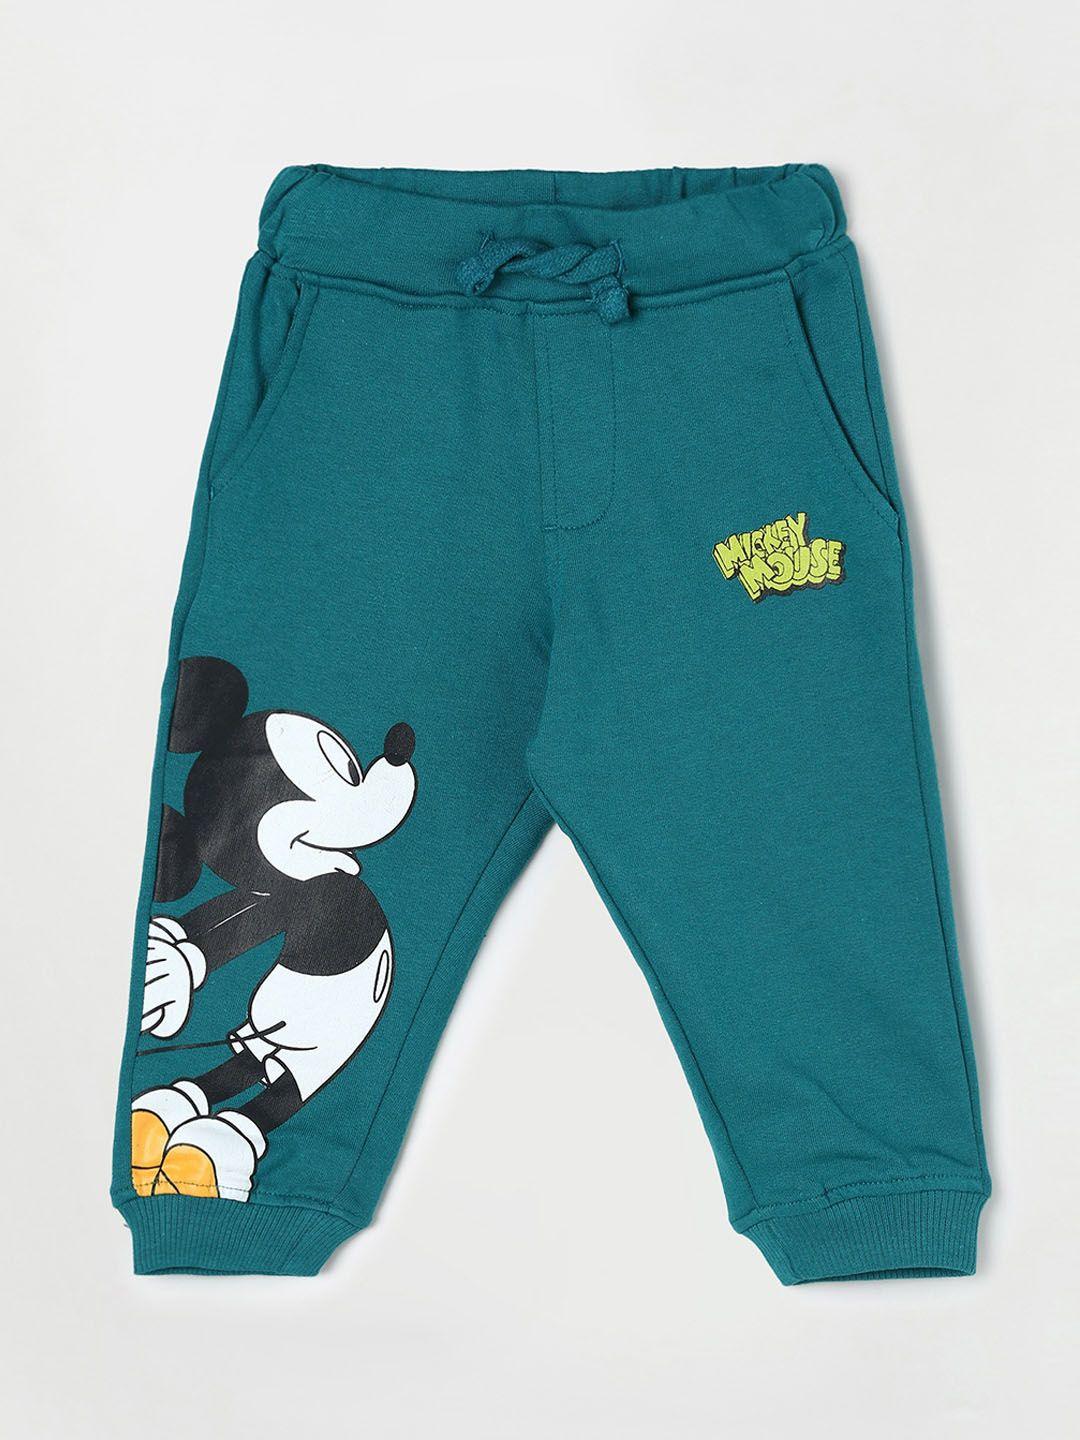 Juniors by Lifestyle Boys Teal Blue Mickey Mouse Printed Cotton Joggers